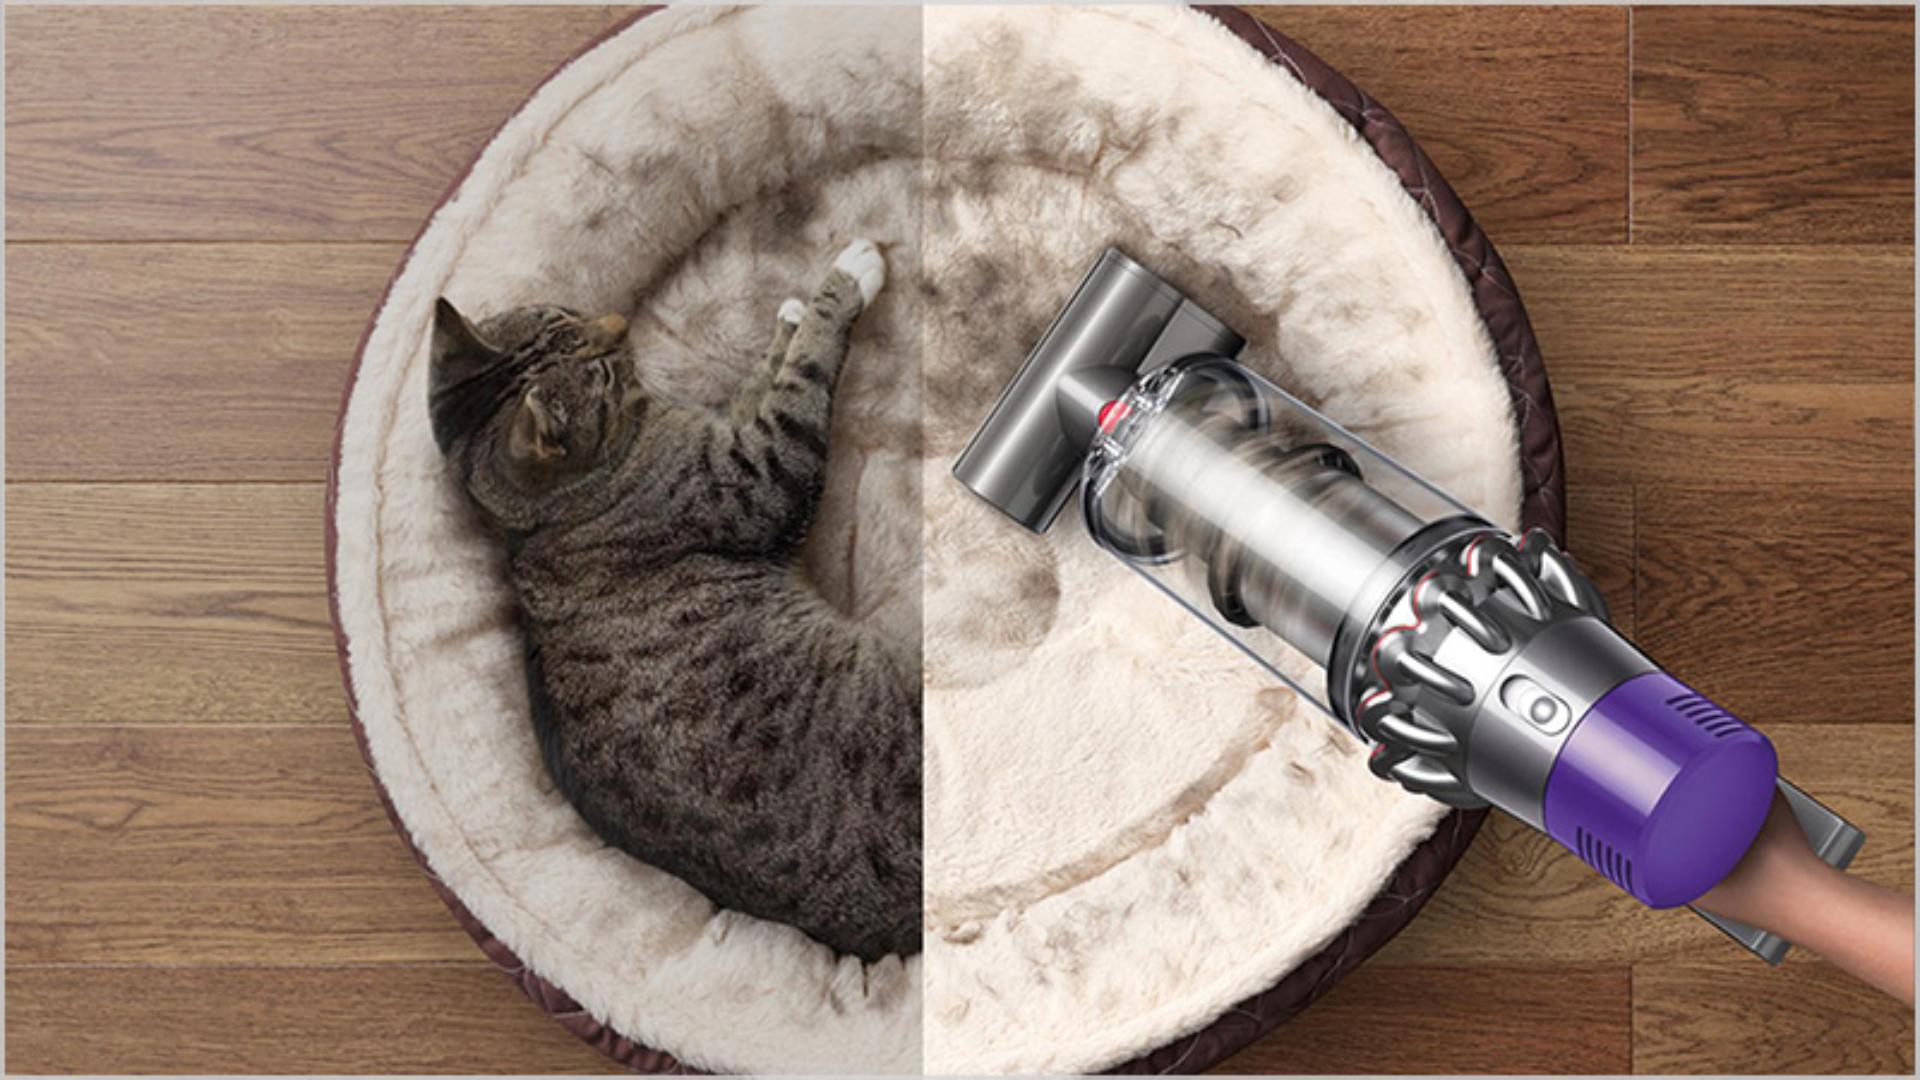 Dyson vacuum being used on pet bed